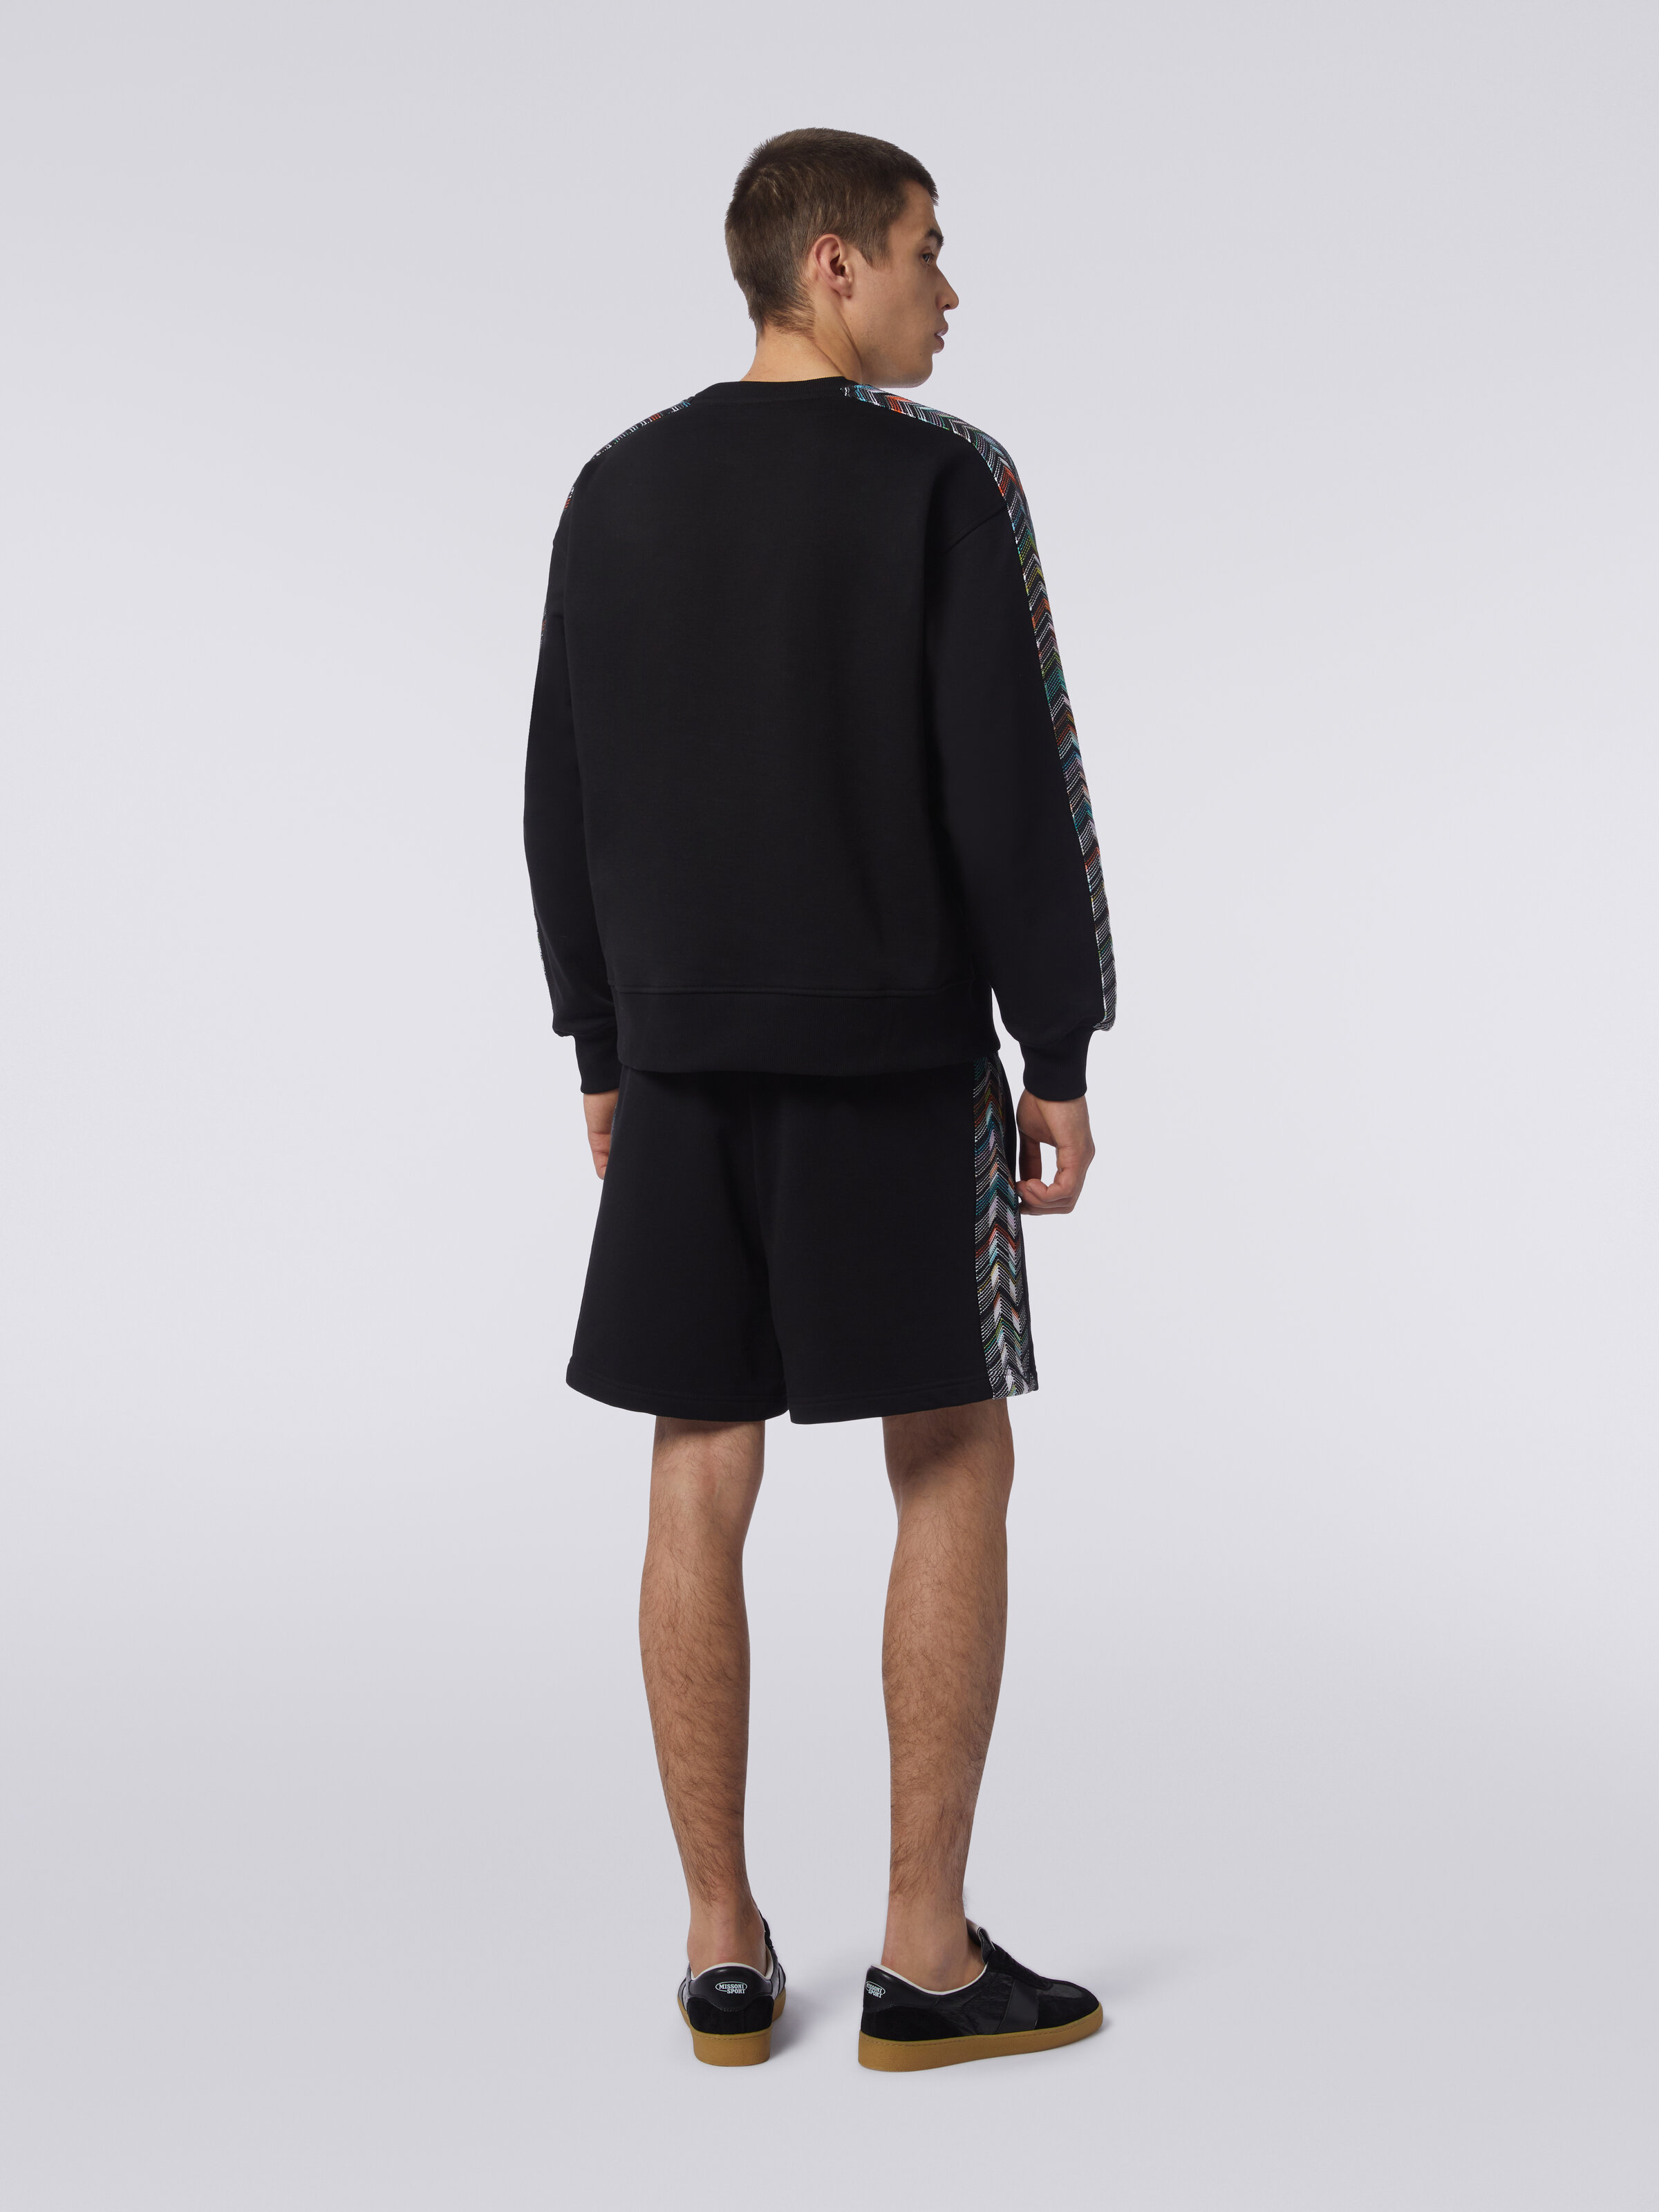 Shorts in fleece with logo and knitted side bands, Black    - 3